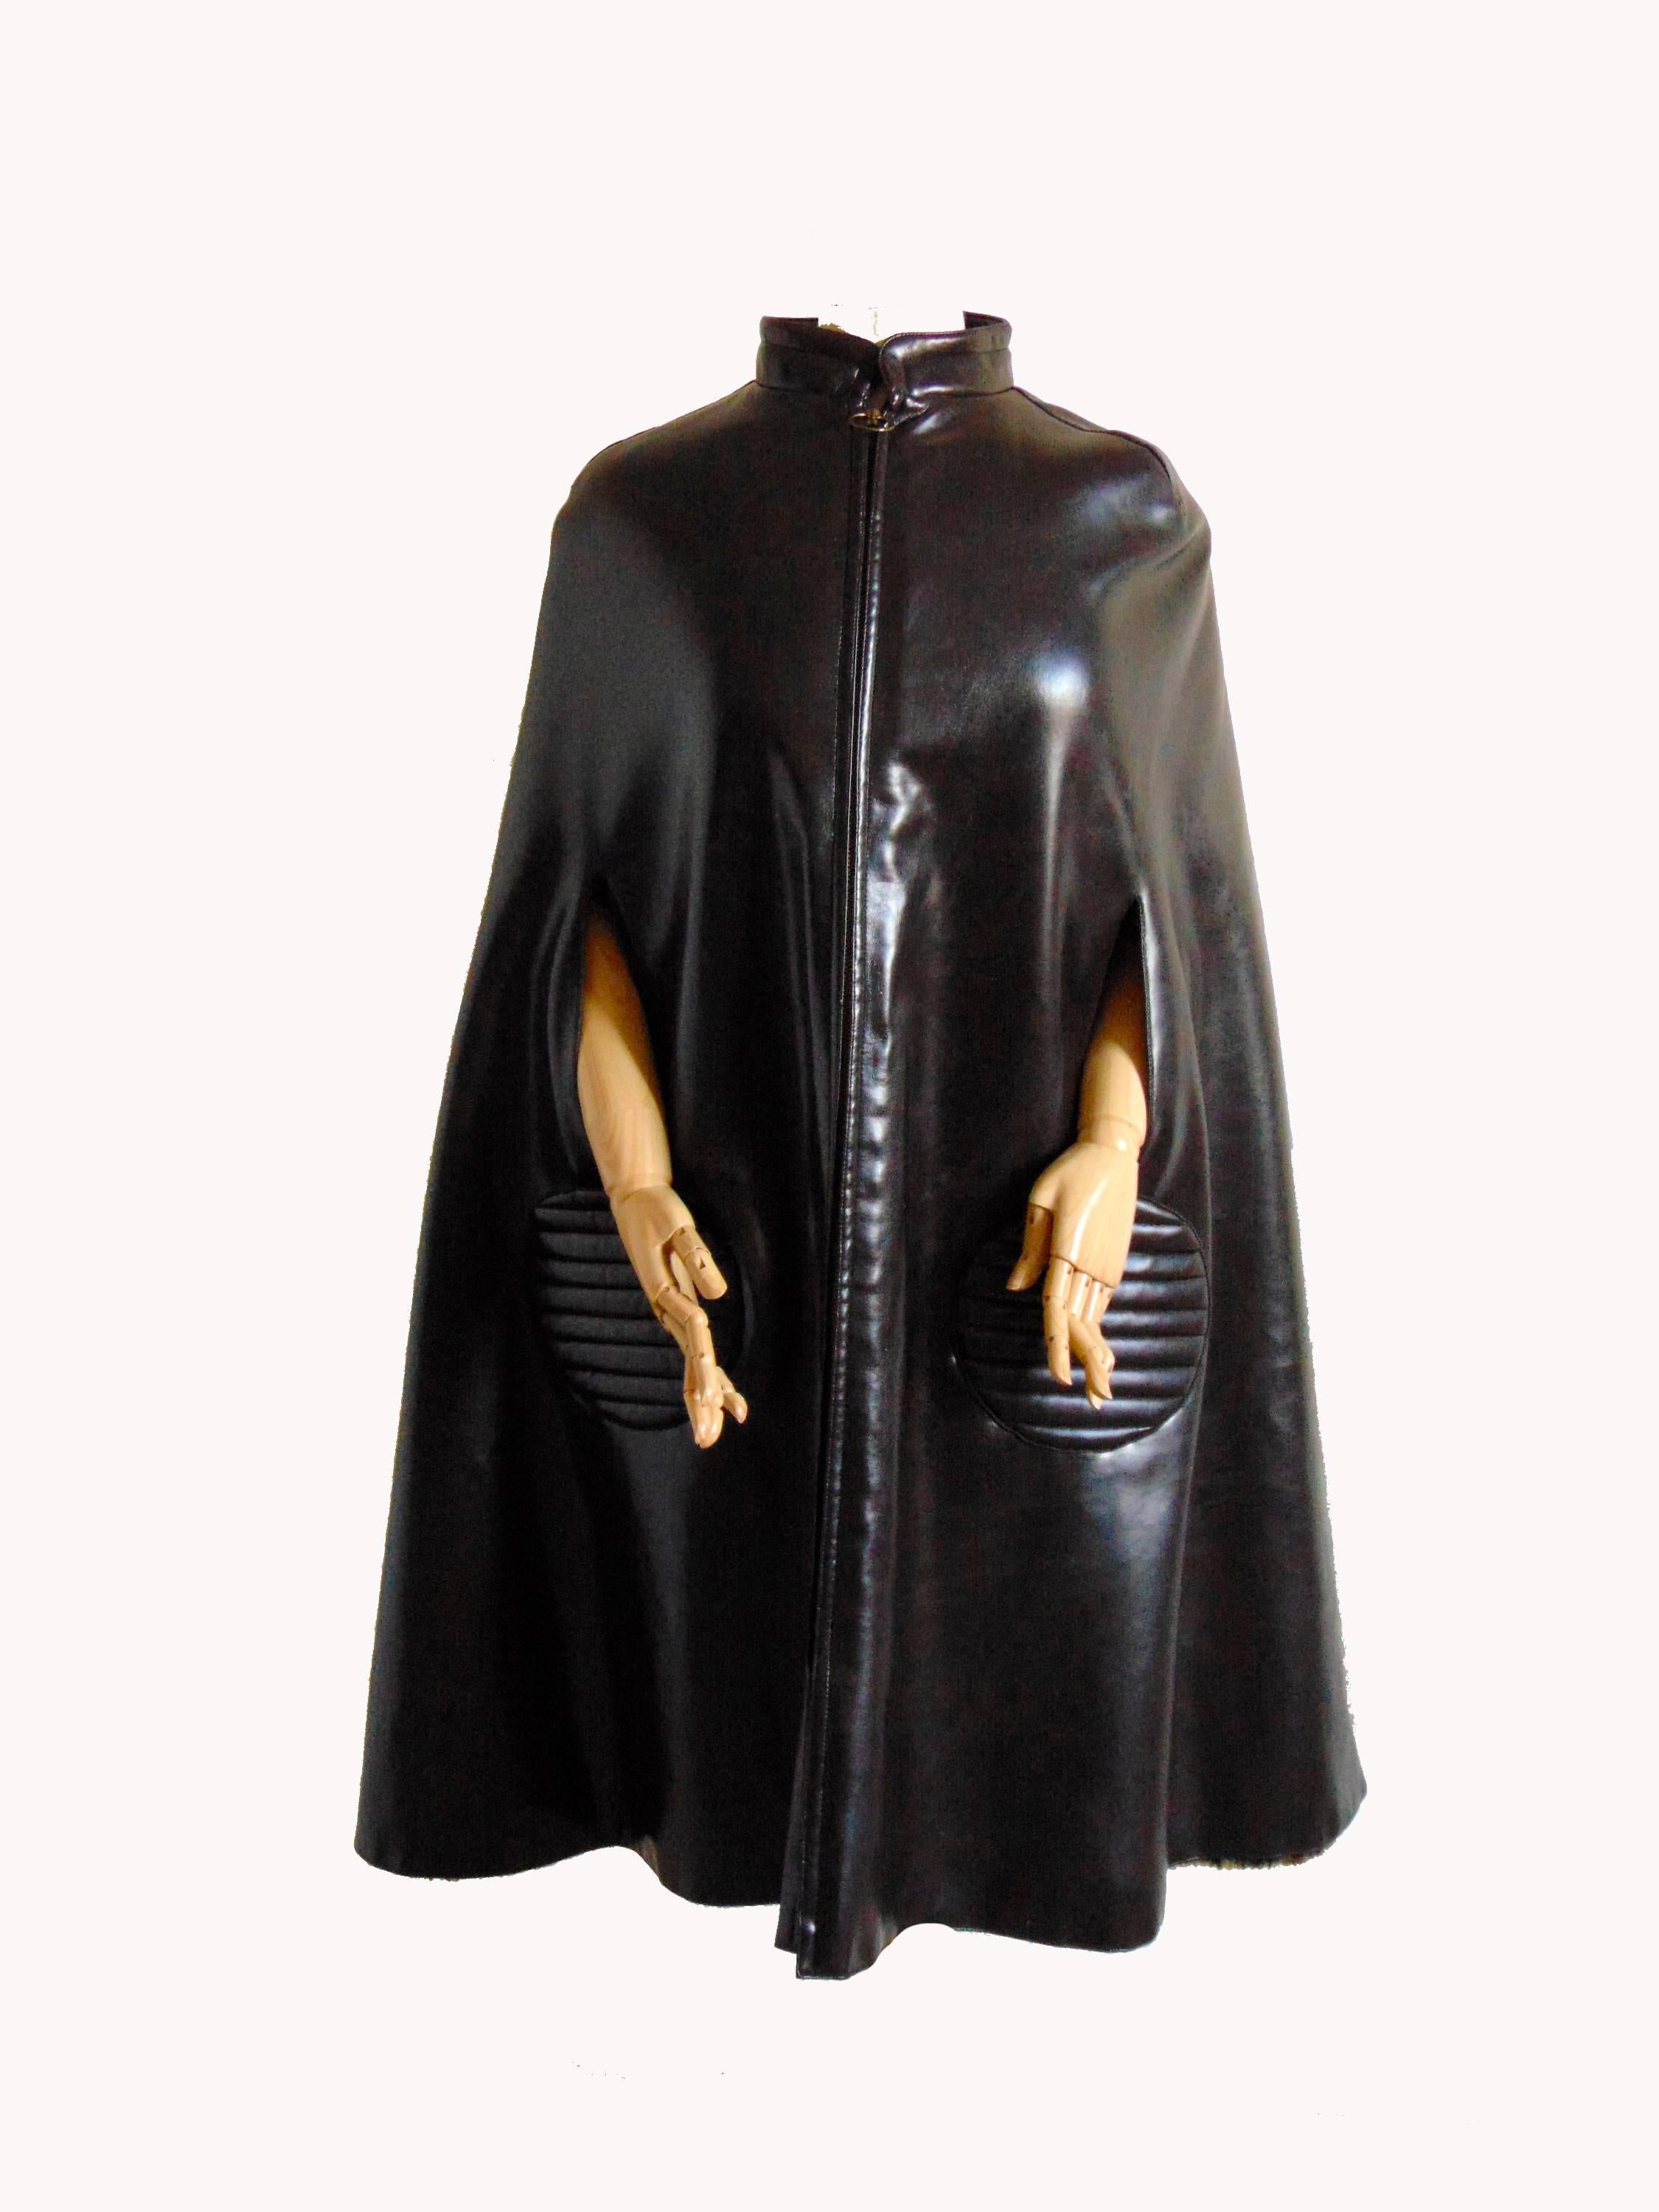 This incredible space age cape was made by Pierre Cardin in the 1960s.  Made from an unusual espresso brown vinyl, it fastens with a chunky brass zipper and pull ring and is fully lined in spotted faux fur.  Each outer pocket features mod quilted